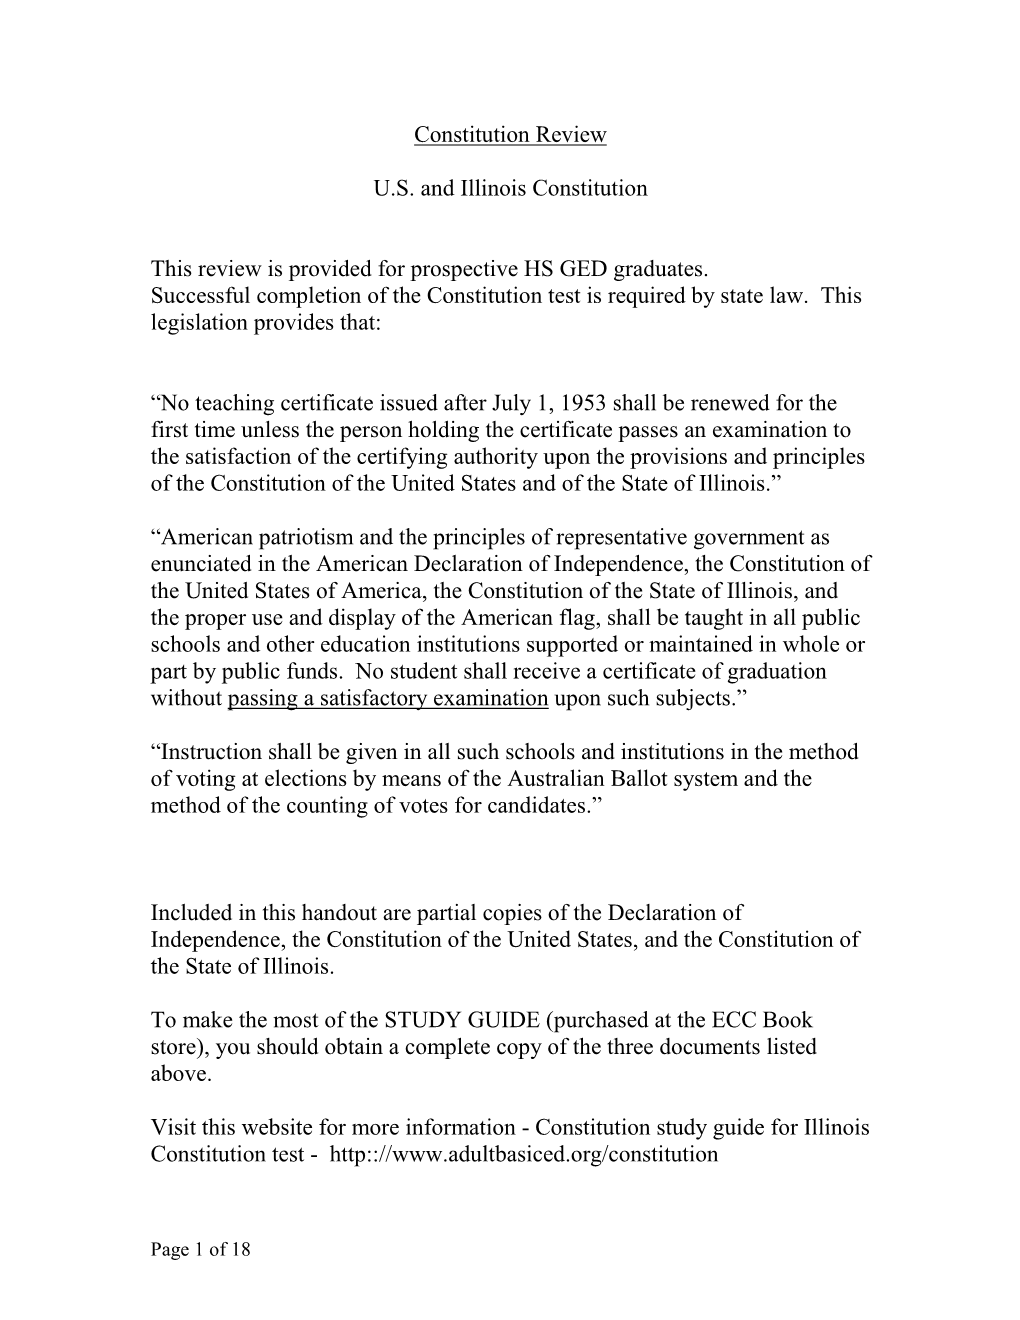 Constitution Review Sheet